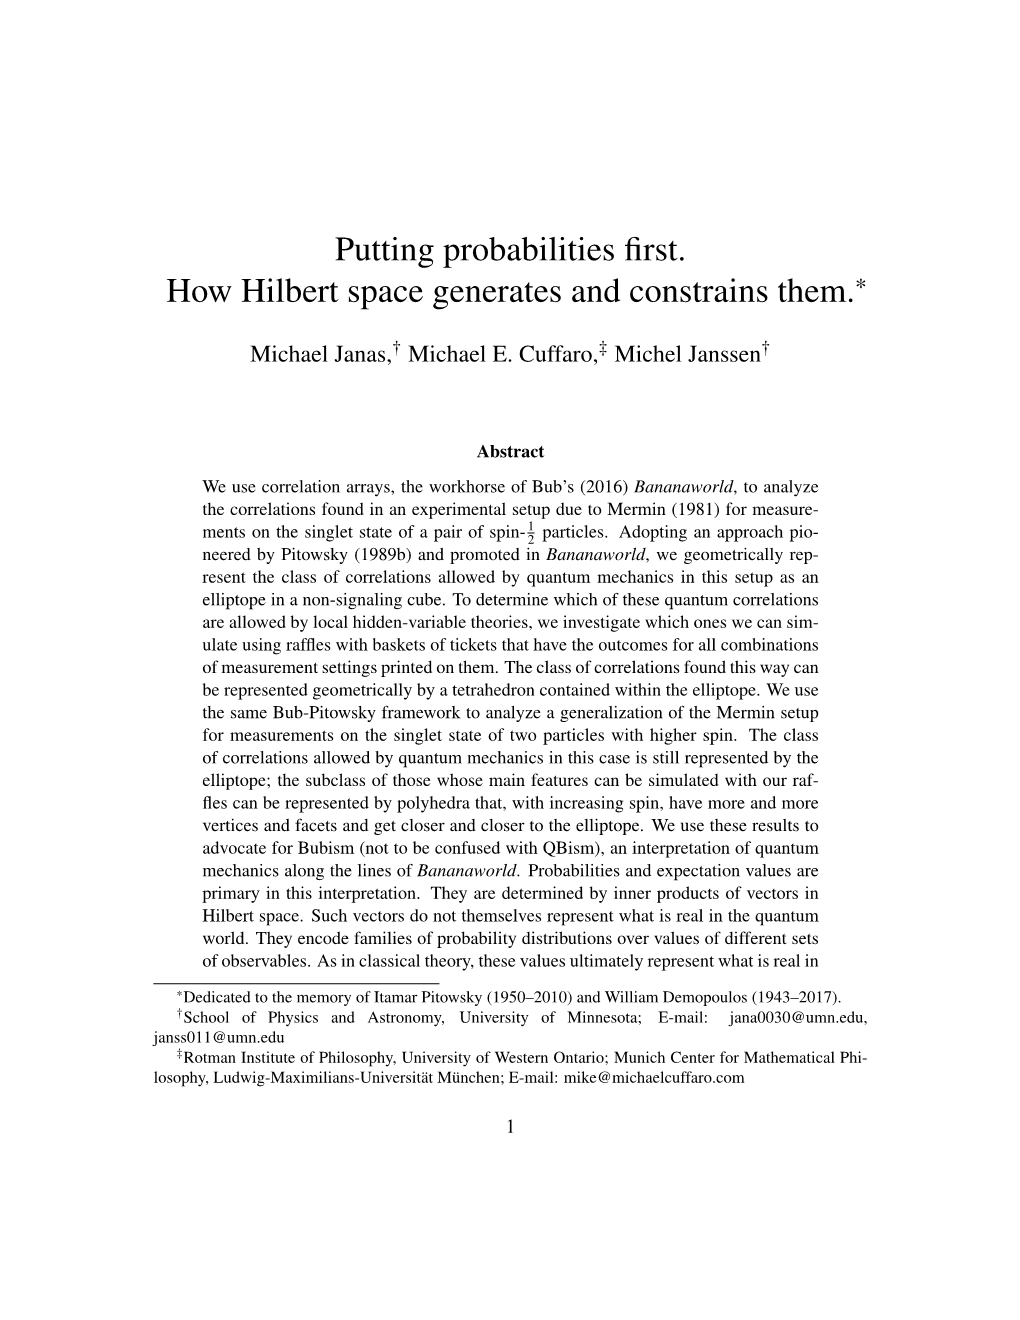 Putting Probabilities First. How Hilbert Space Generates